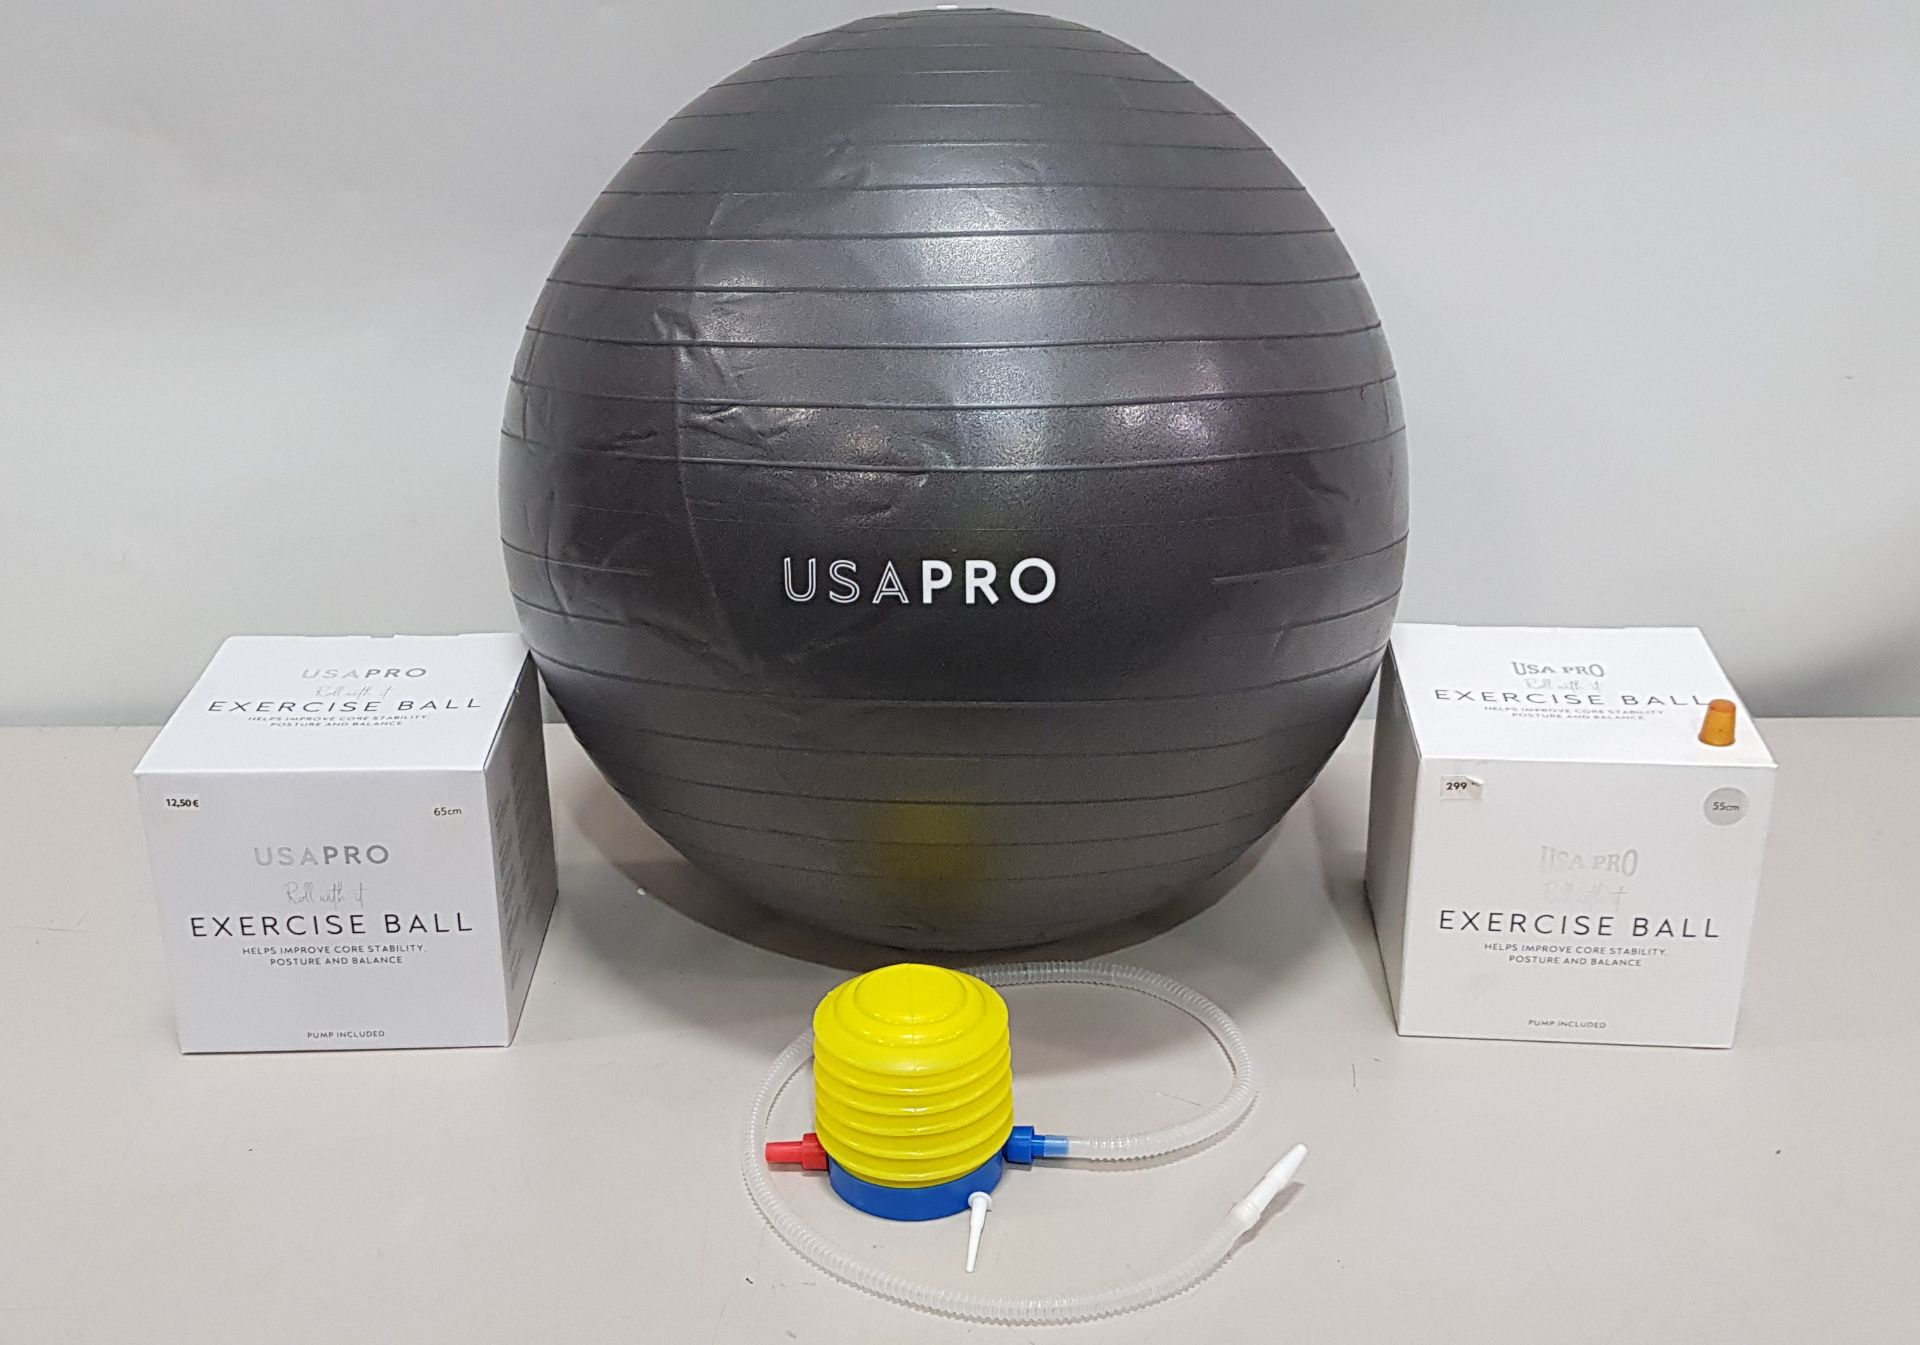 60 X BRAND NEW USA PRO EXERCISE BALL - INCLUDES PUMP - IN 2 SIZES TO INCLUDE 55 CM / 65 CM - RRP £